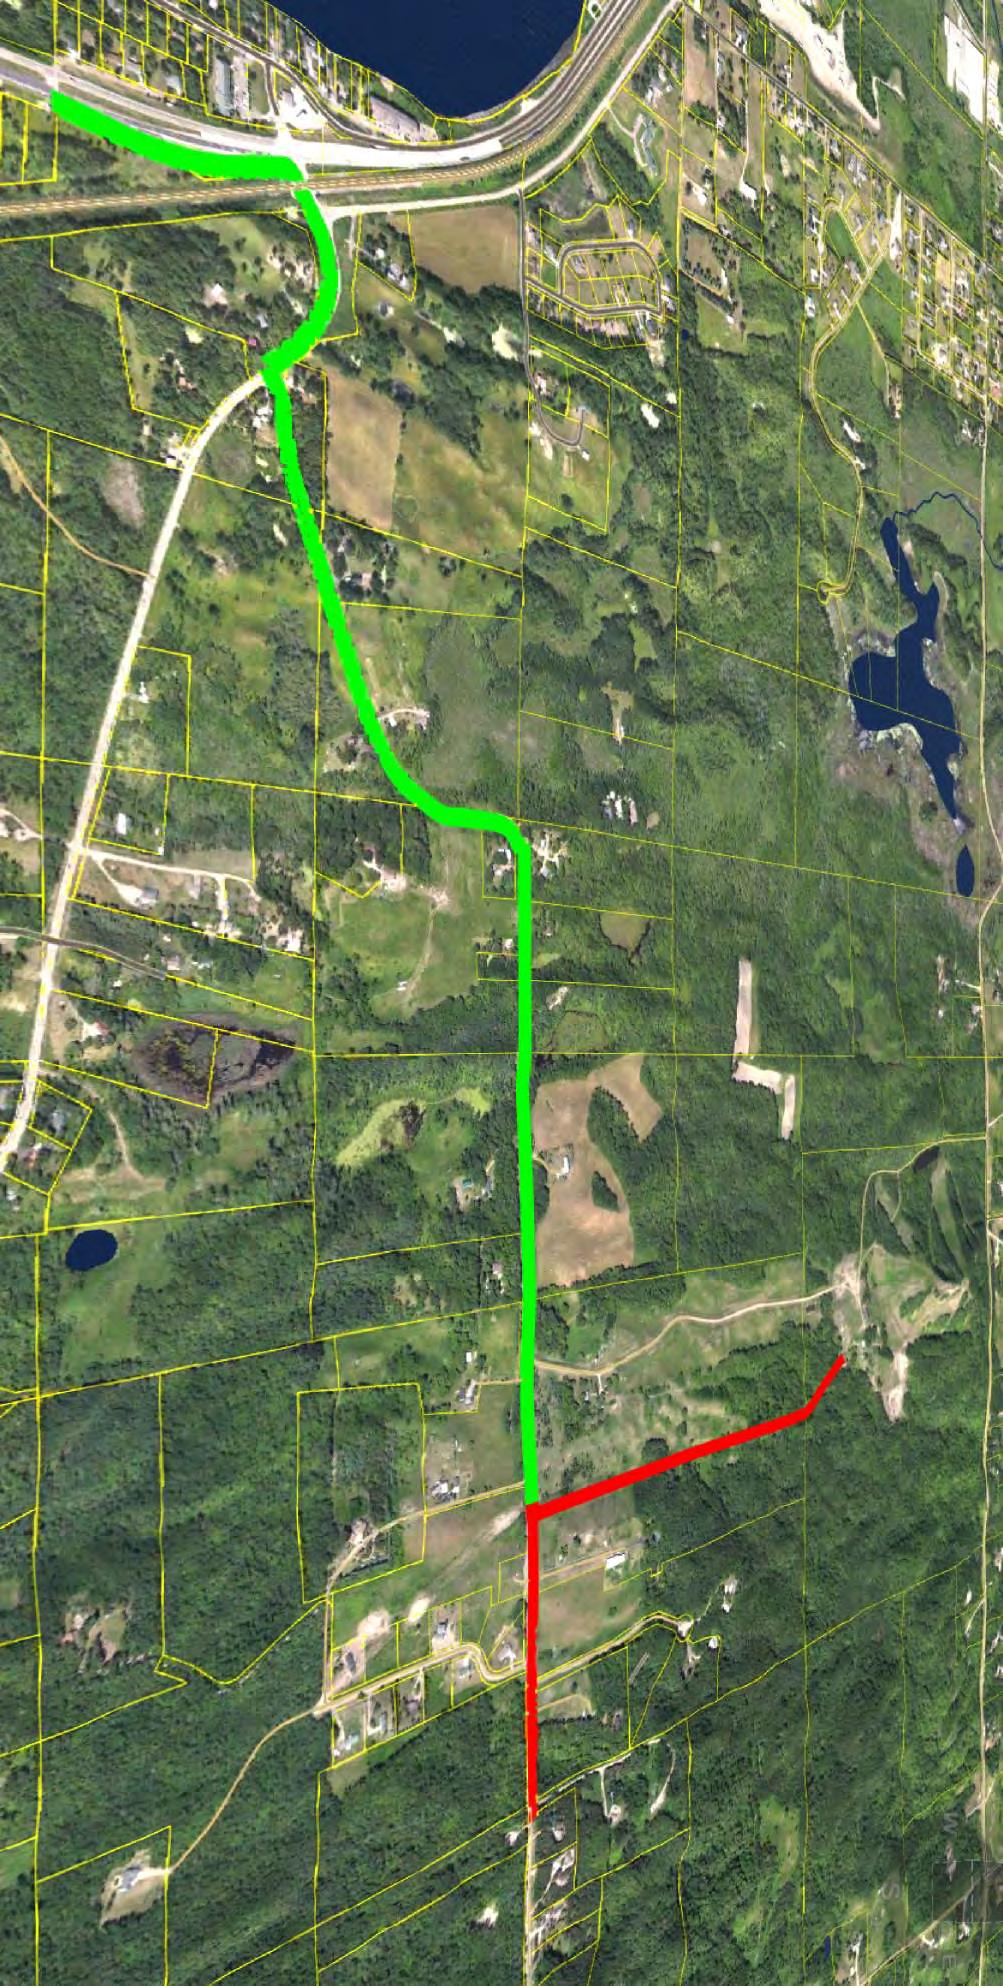 N W E S TRAIL FEASIBILITY STUDY ROUTE 1 BECKER COUNTY, MINNESOTA DRAWN BY: CJB CHECKED BY: BJK APPROVED BY: BJK 1041 Hawk Street Detroit Lakes, Minnesota 56502 Phone: 218.846.